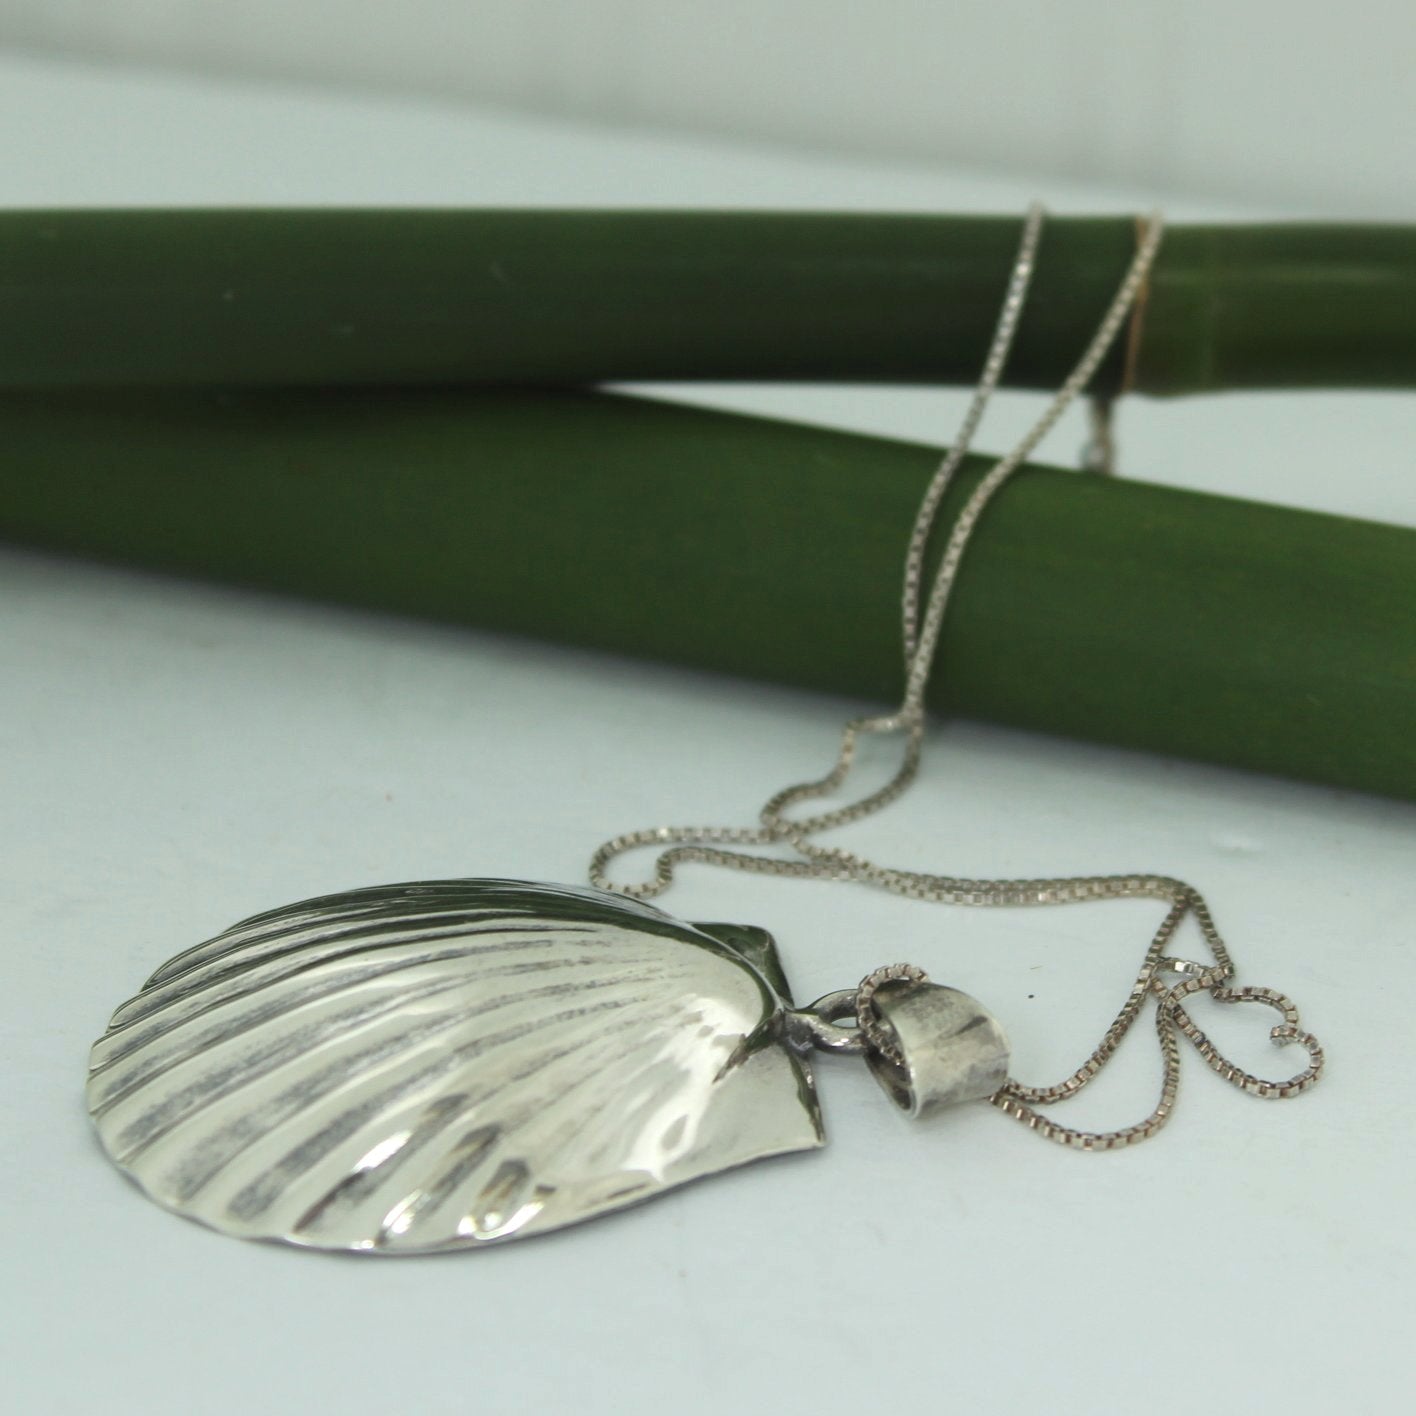 Vintage Pendant Necklace Dimensional Scallop Shell 925 Sterling Silver side view of shape